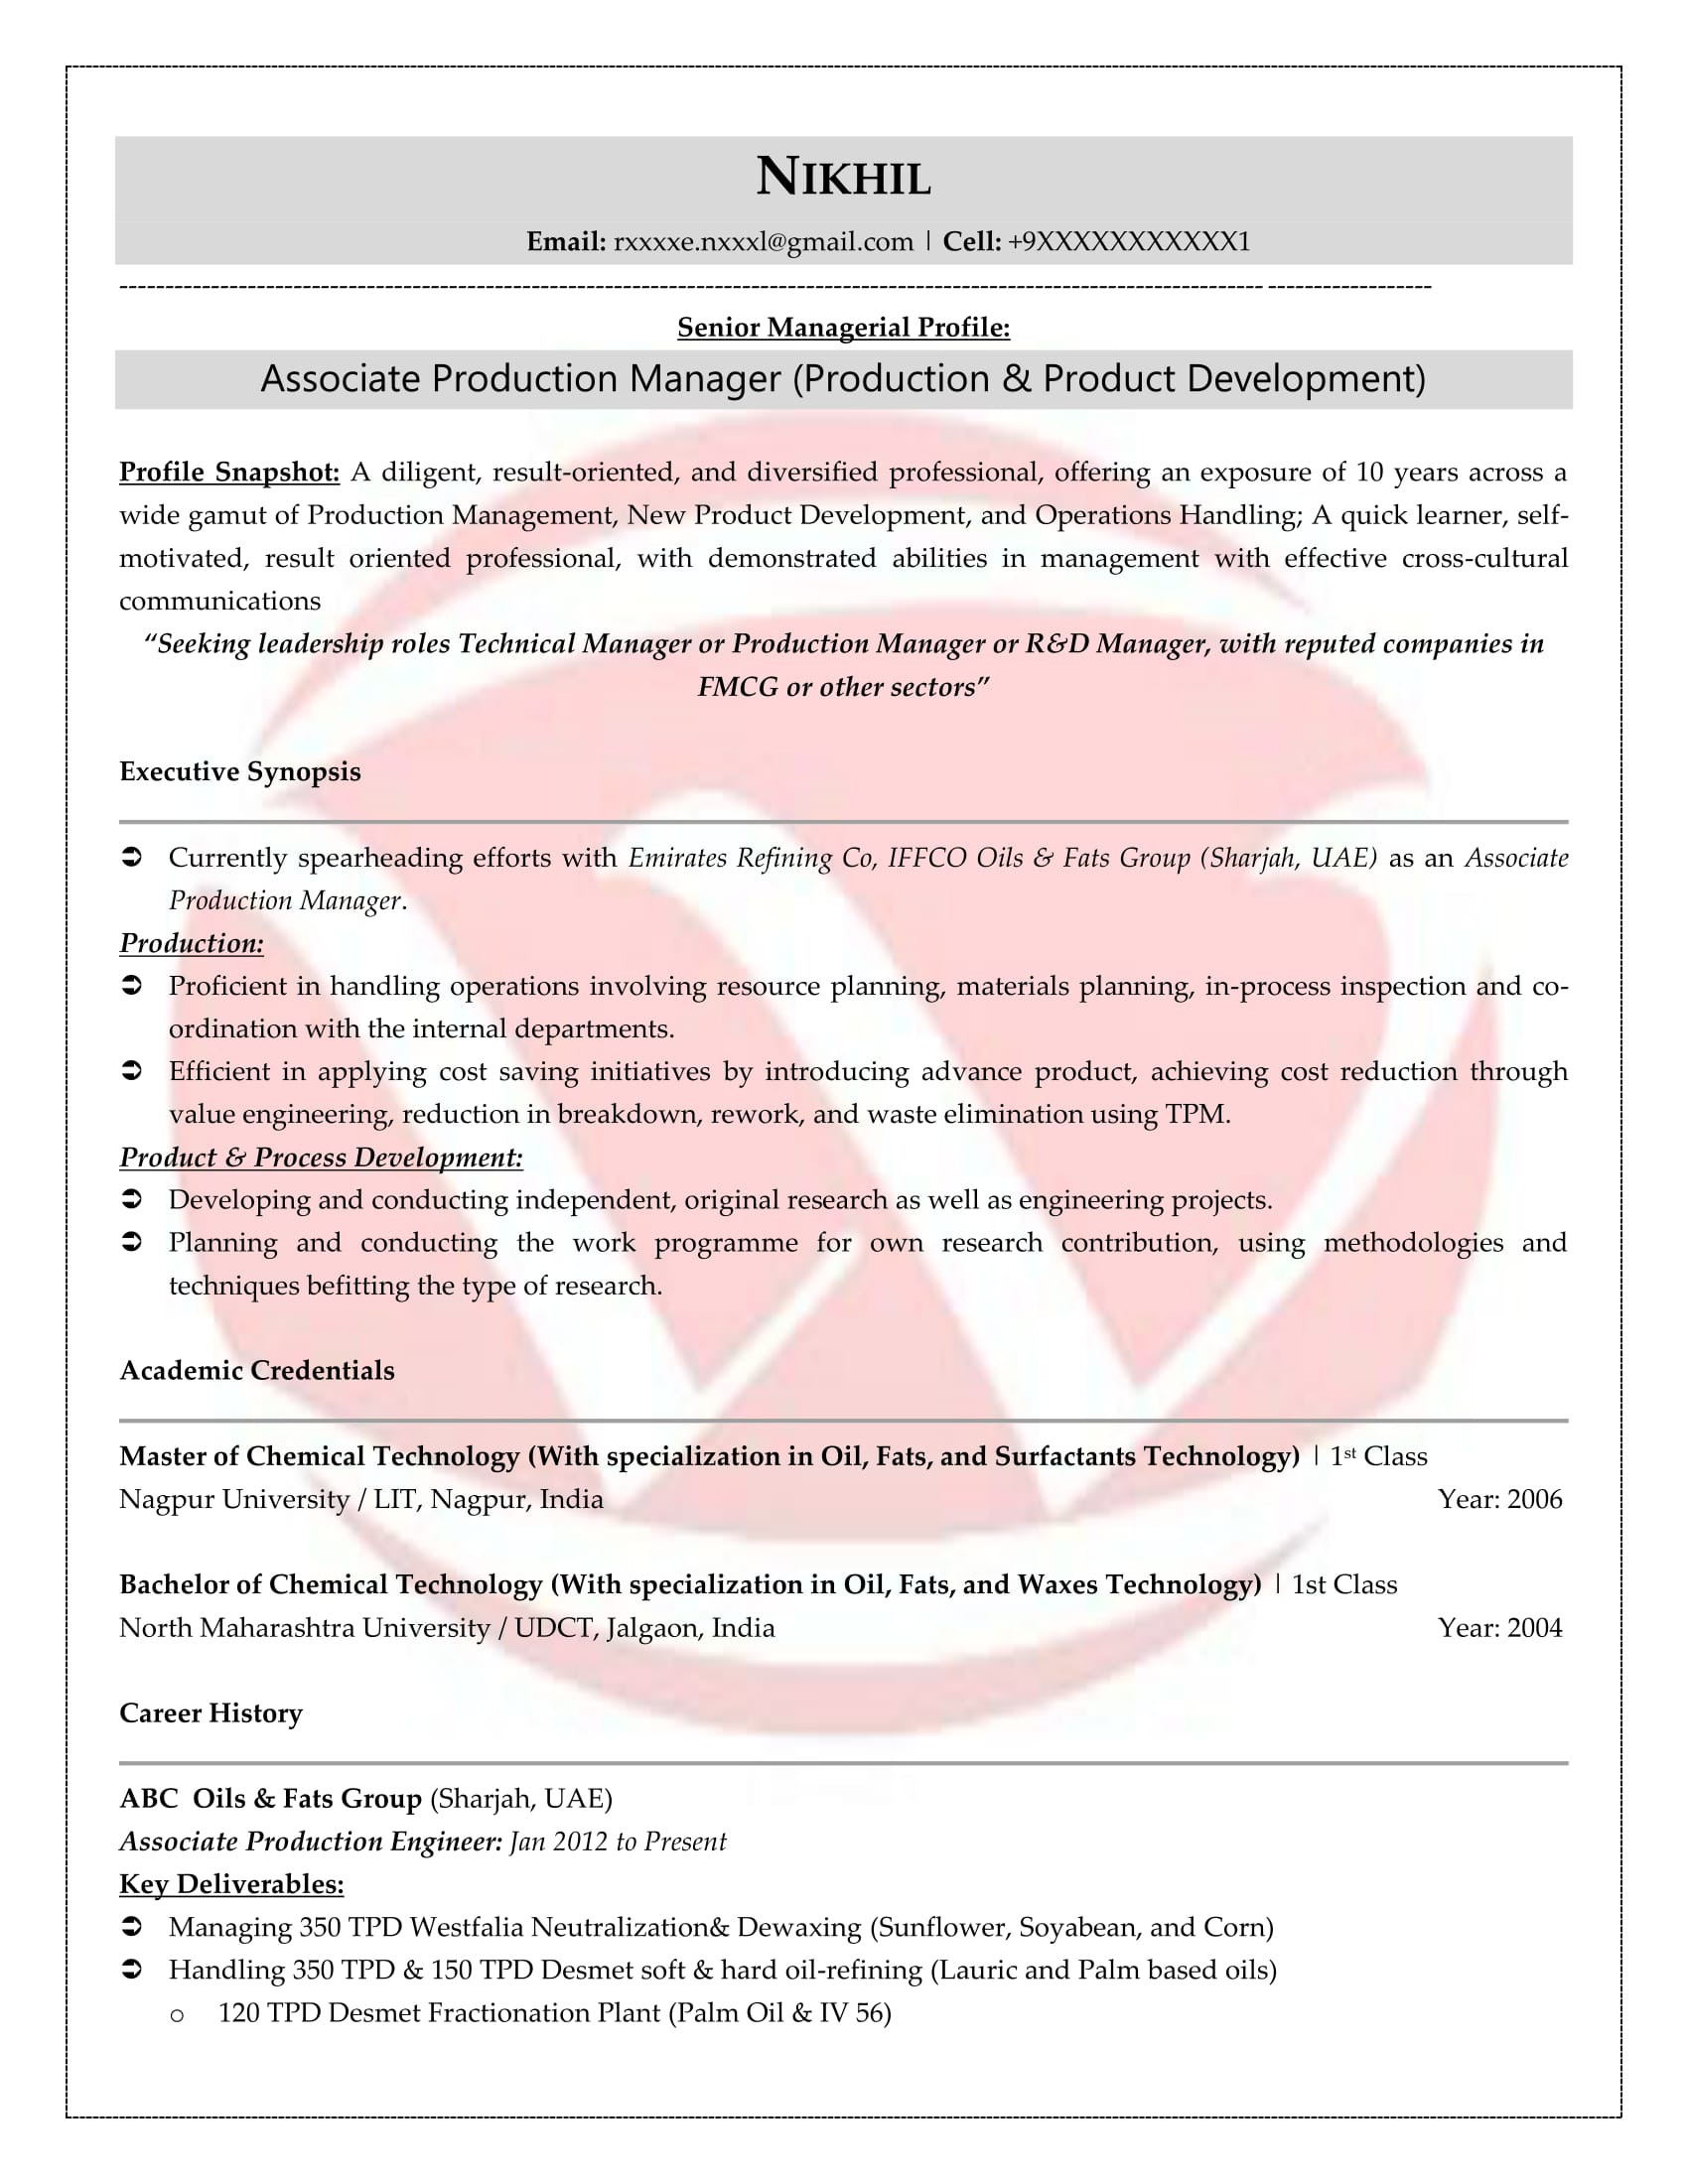 Sample Resume for Production Manager In India Production Sample Resumes, Download Resume format Templates!